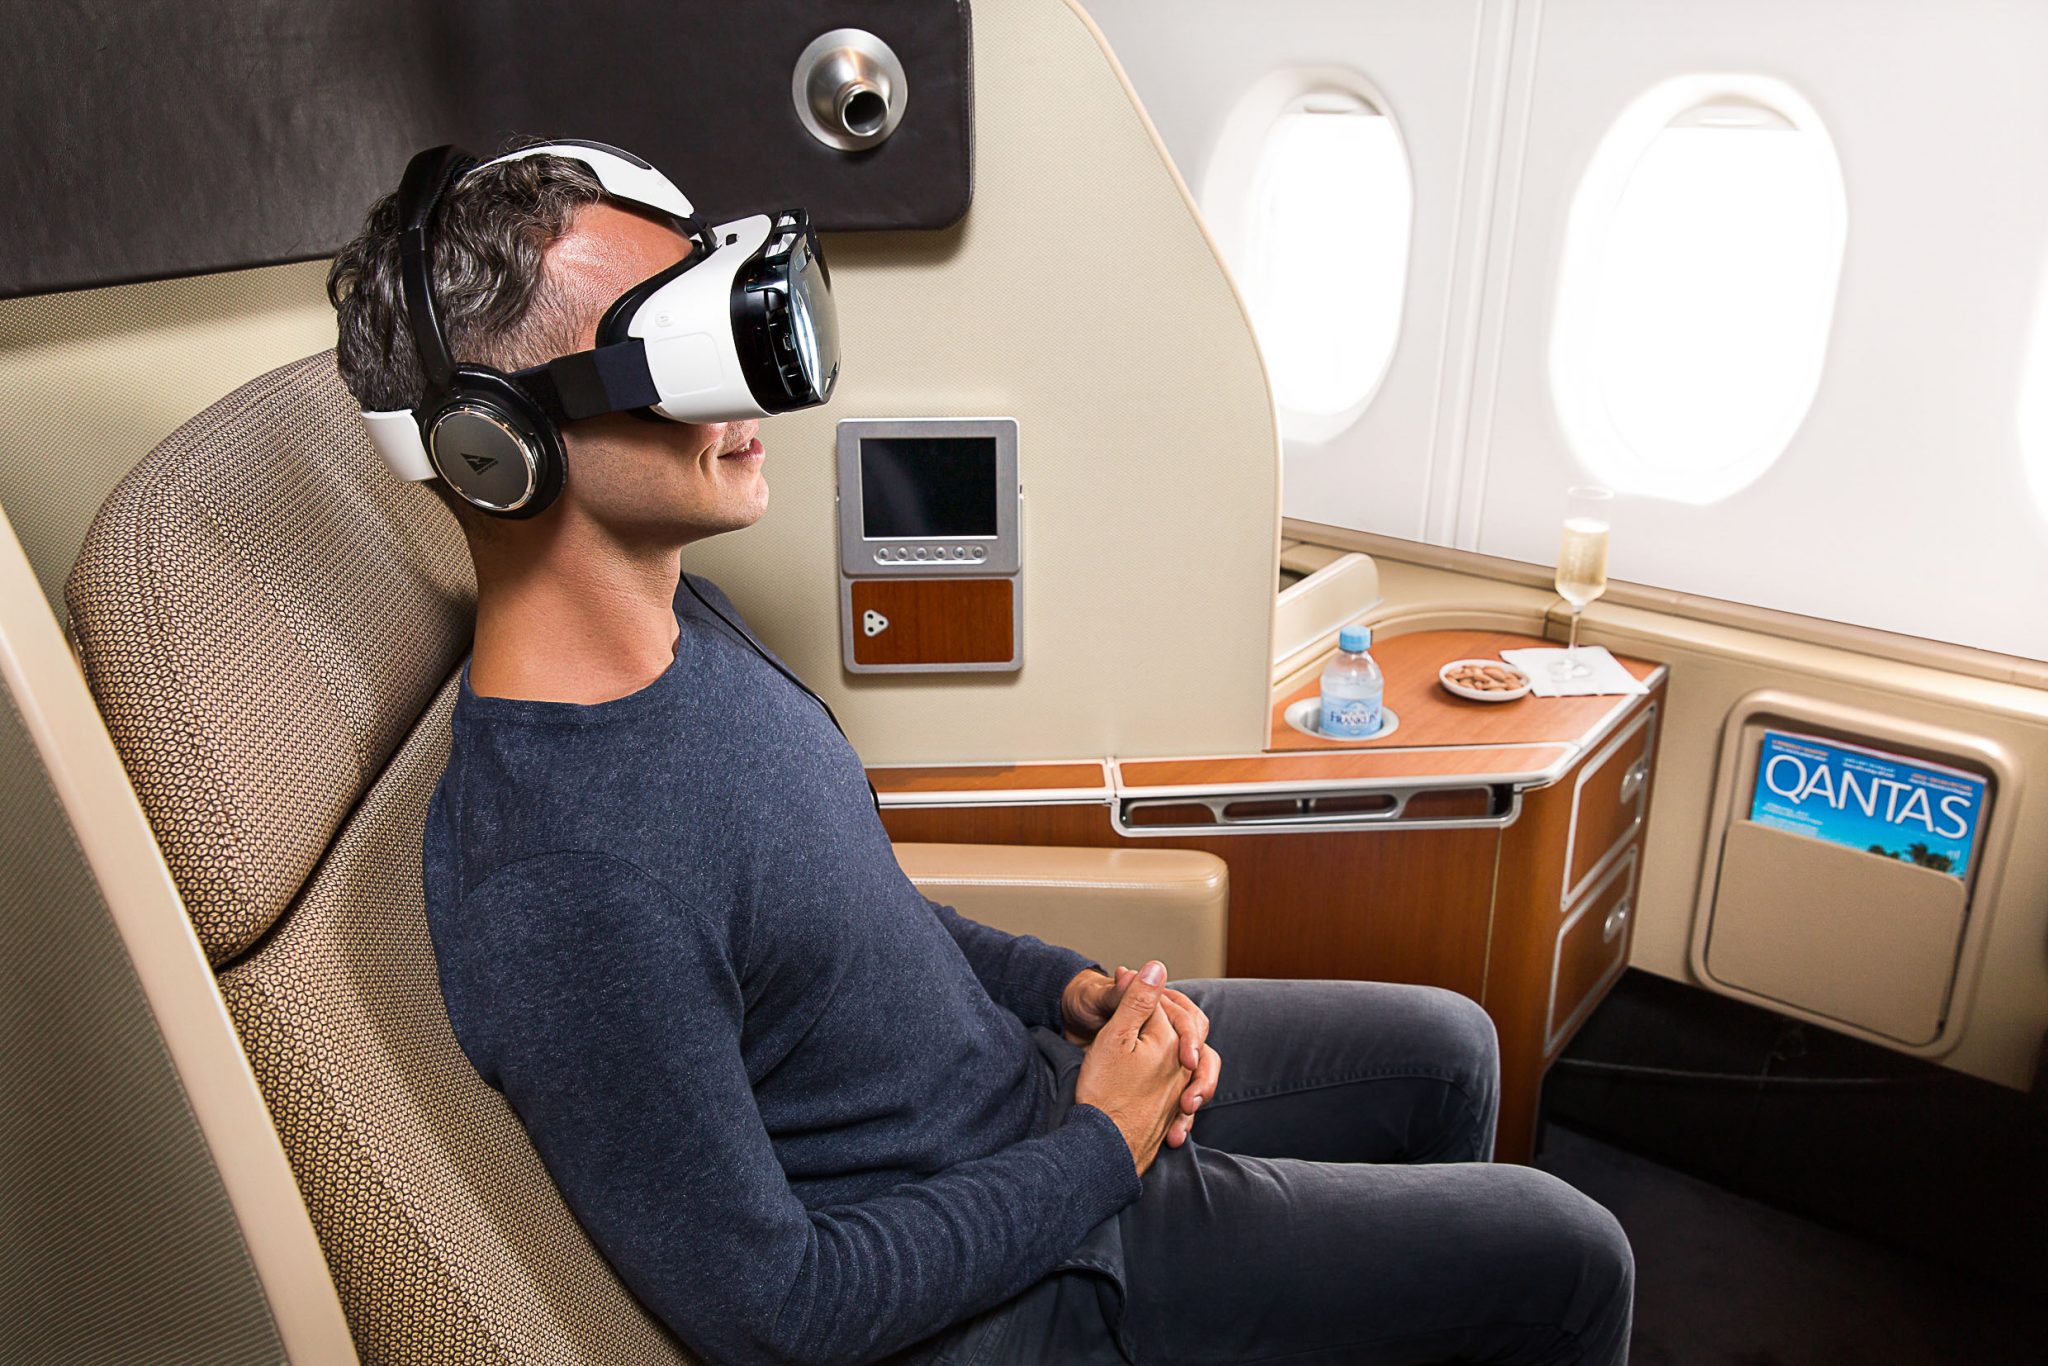 Qantas and Samsung offer a virtual reality experience to passengers